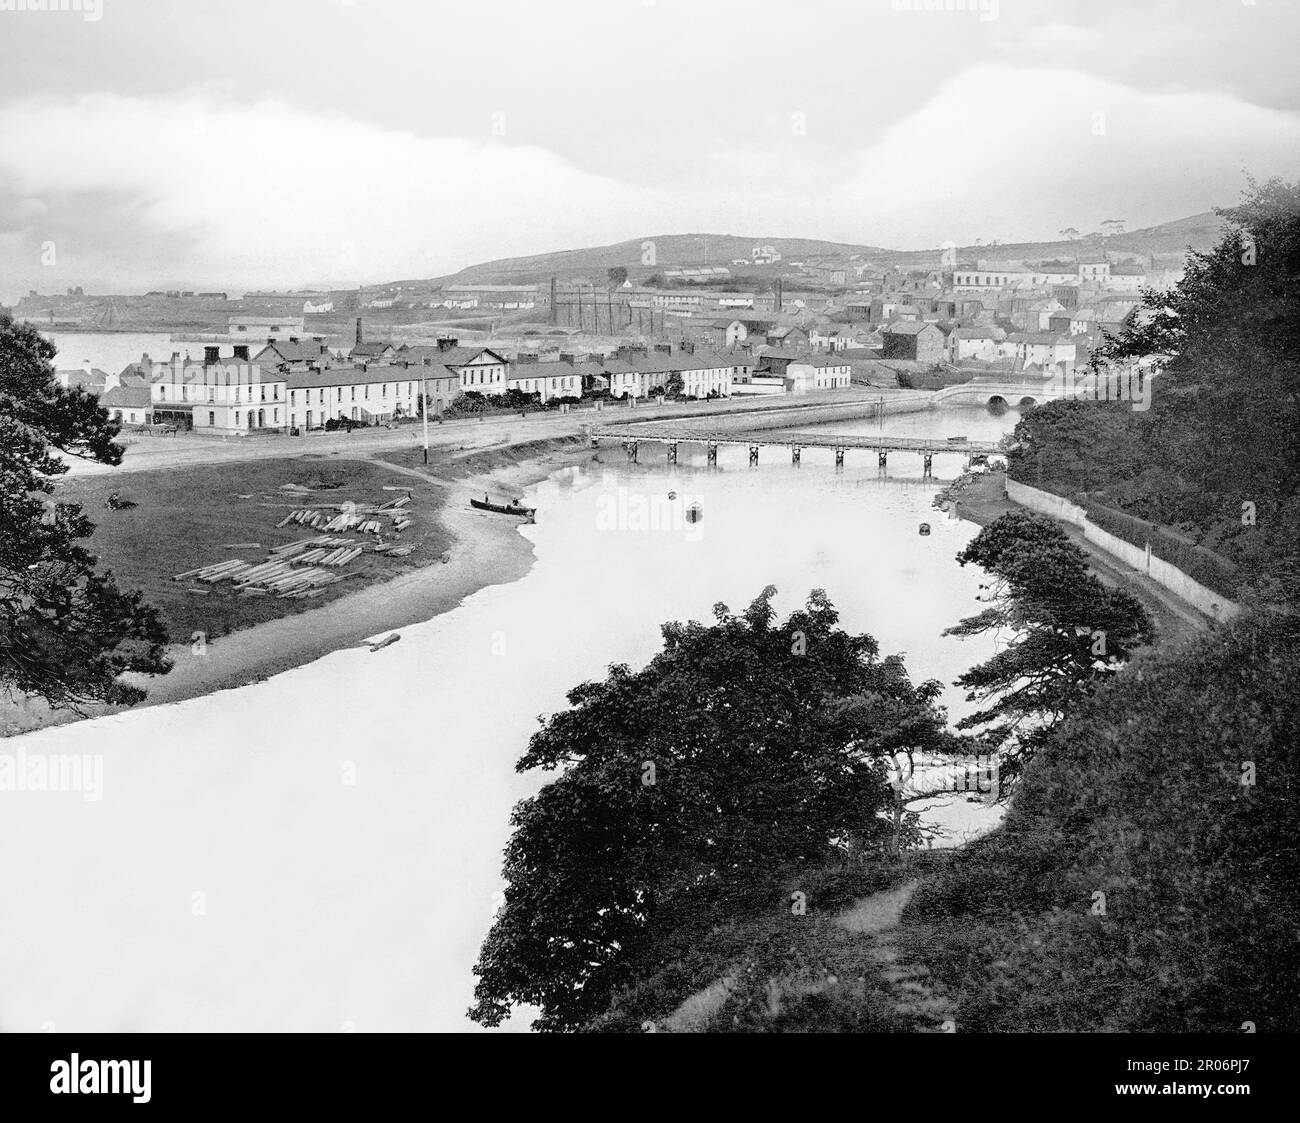 A late 19th century view of Wicklow, the county town of County Wicklow in Ireland. A commercial port for timber and textile imports, the harbour lies on the River Vartry flowing through the town. Stock Photo